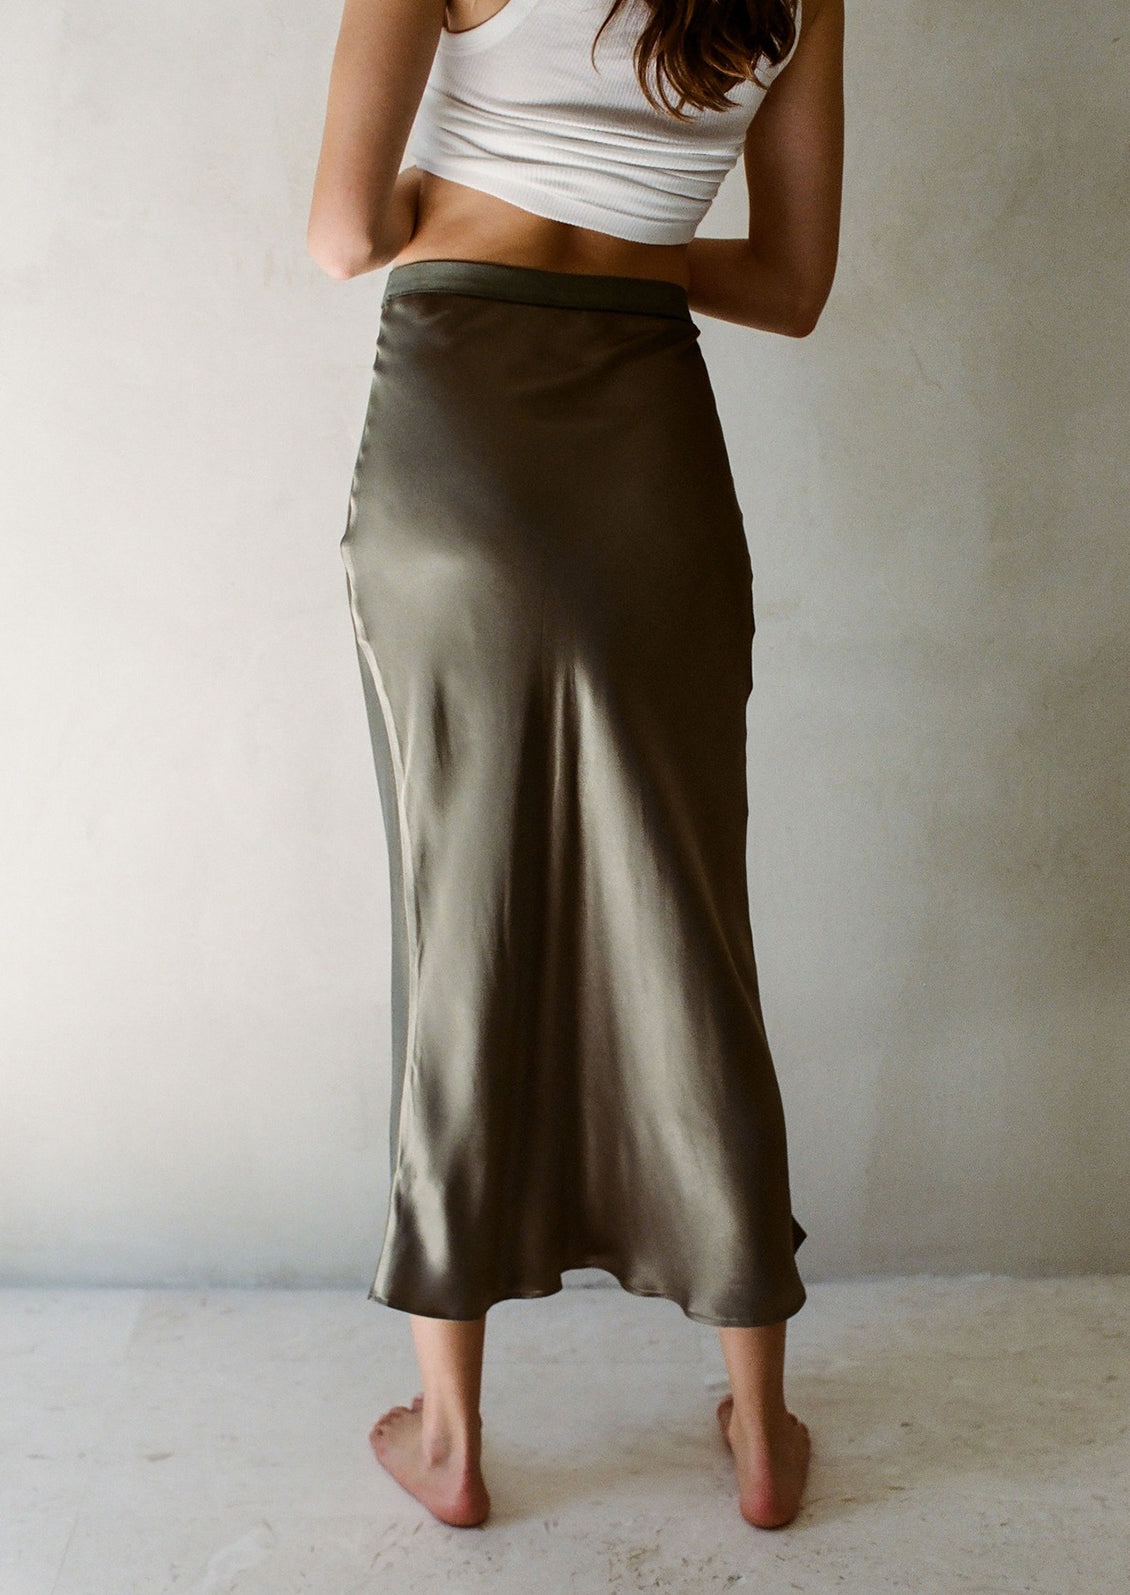 A woman wearing a form fitting skirt in olive green satin material.